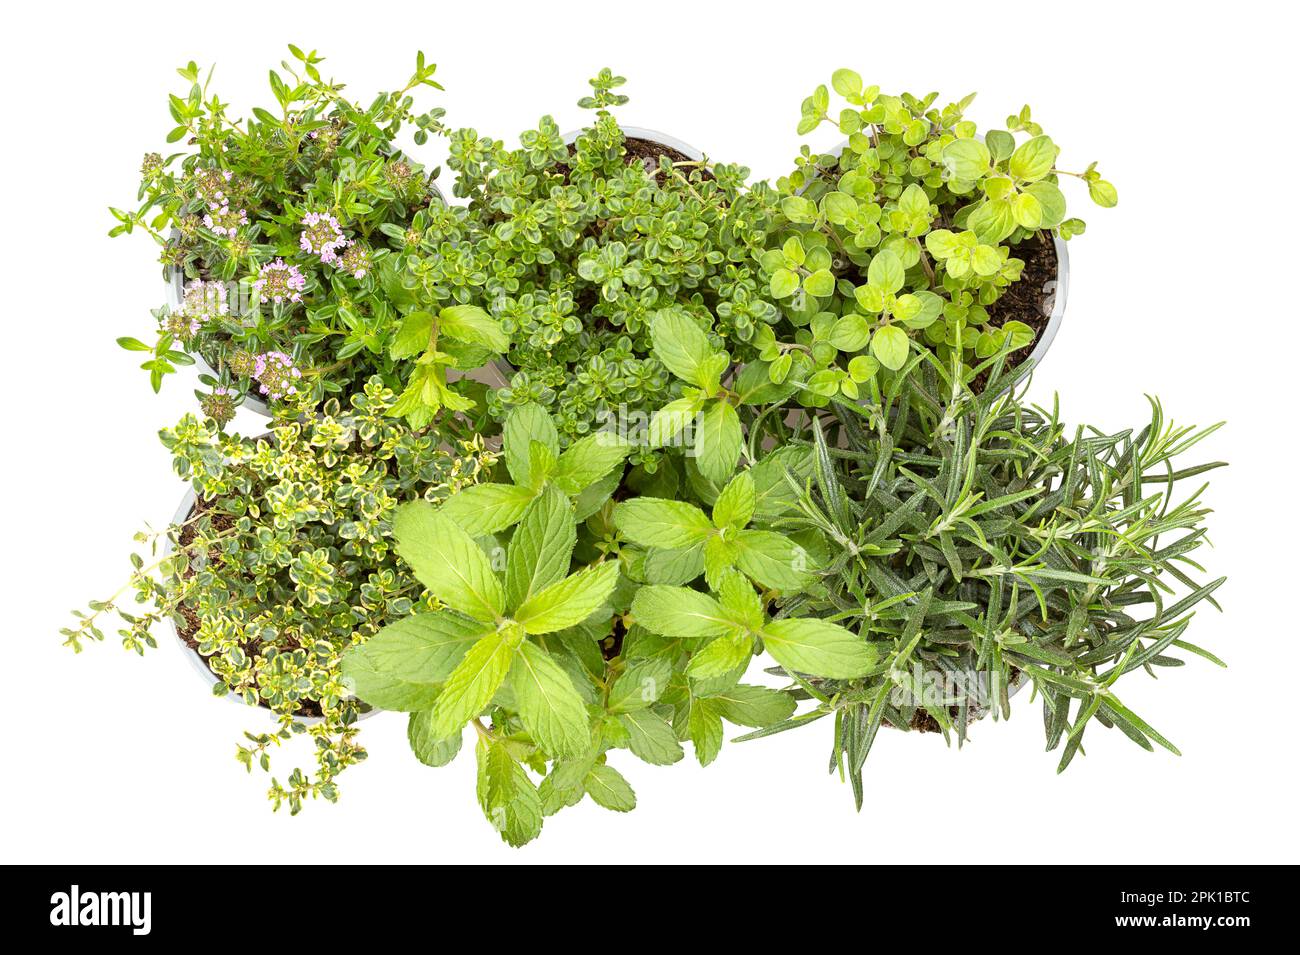 Mediterranean and aromatic culinary herbs. Winter savory, lemon thyme, oregano in the first, lemon thyme, mint and rosemary in the second row. Stock Photo